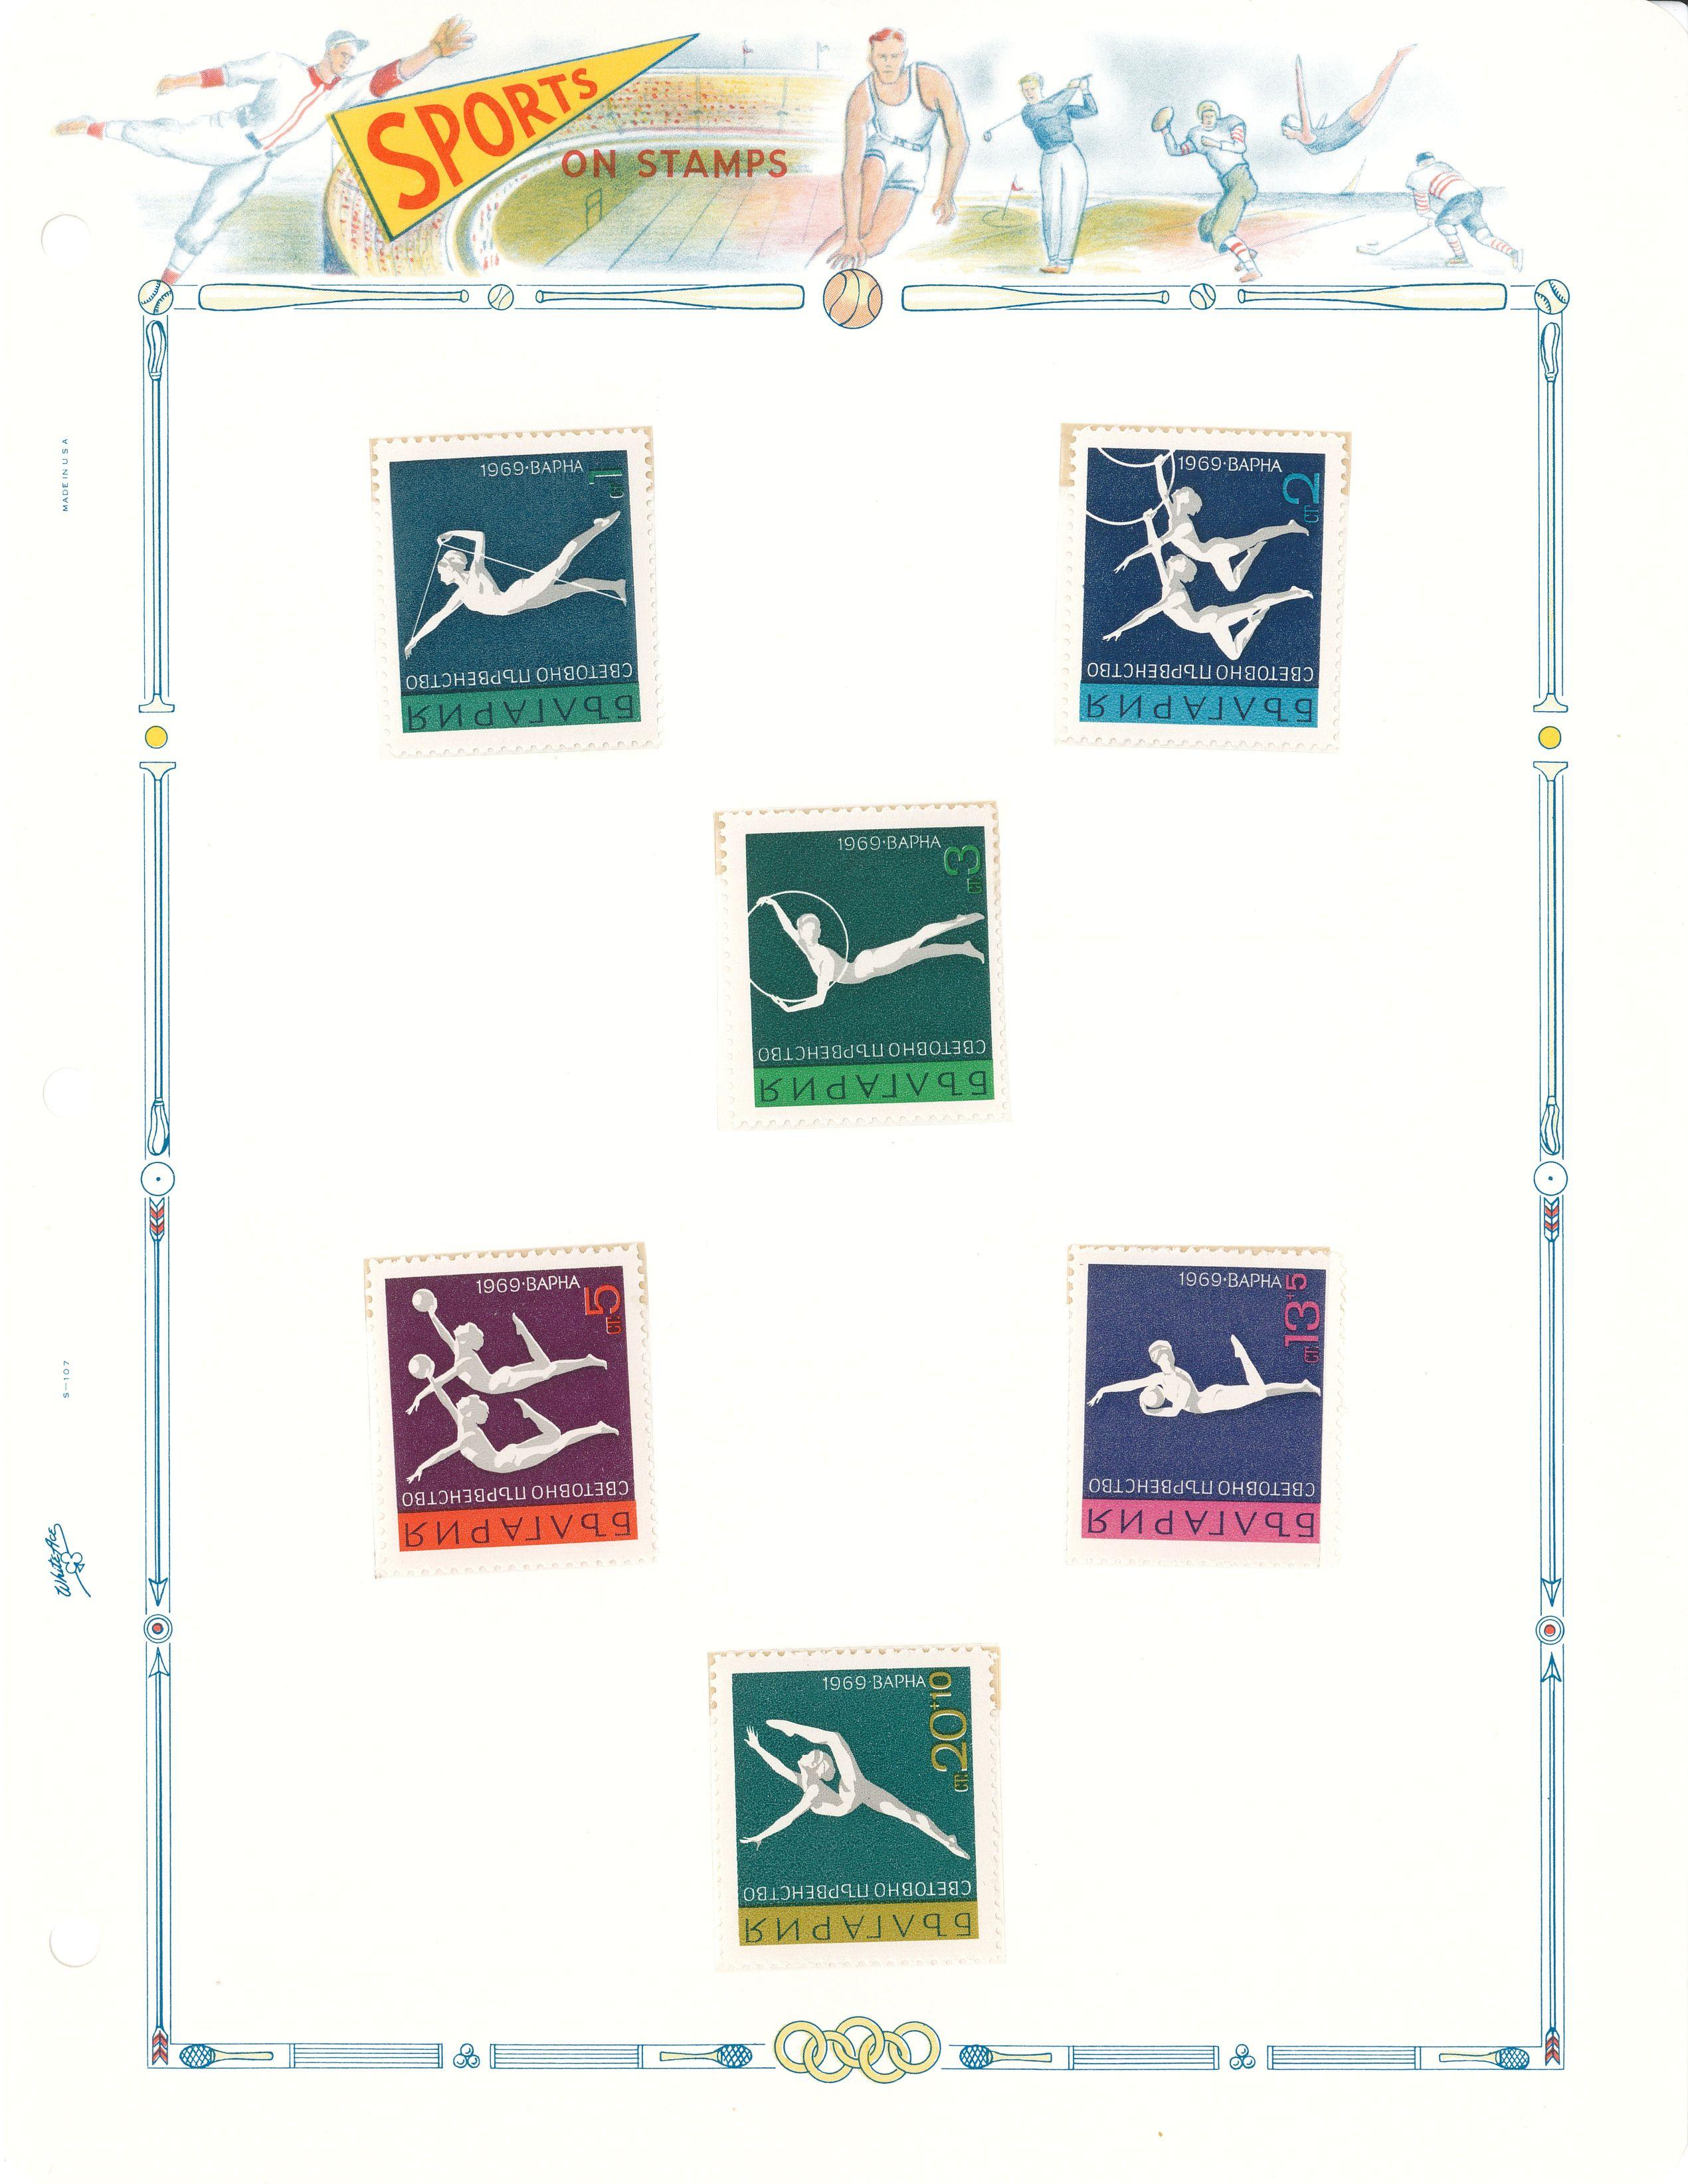 Binder of Sports Related Stamps